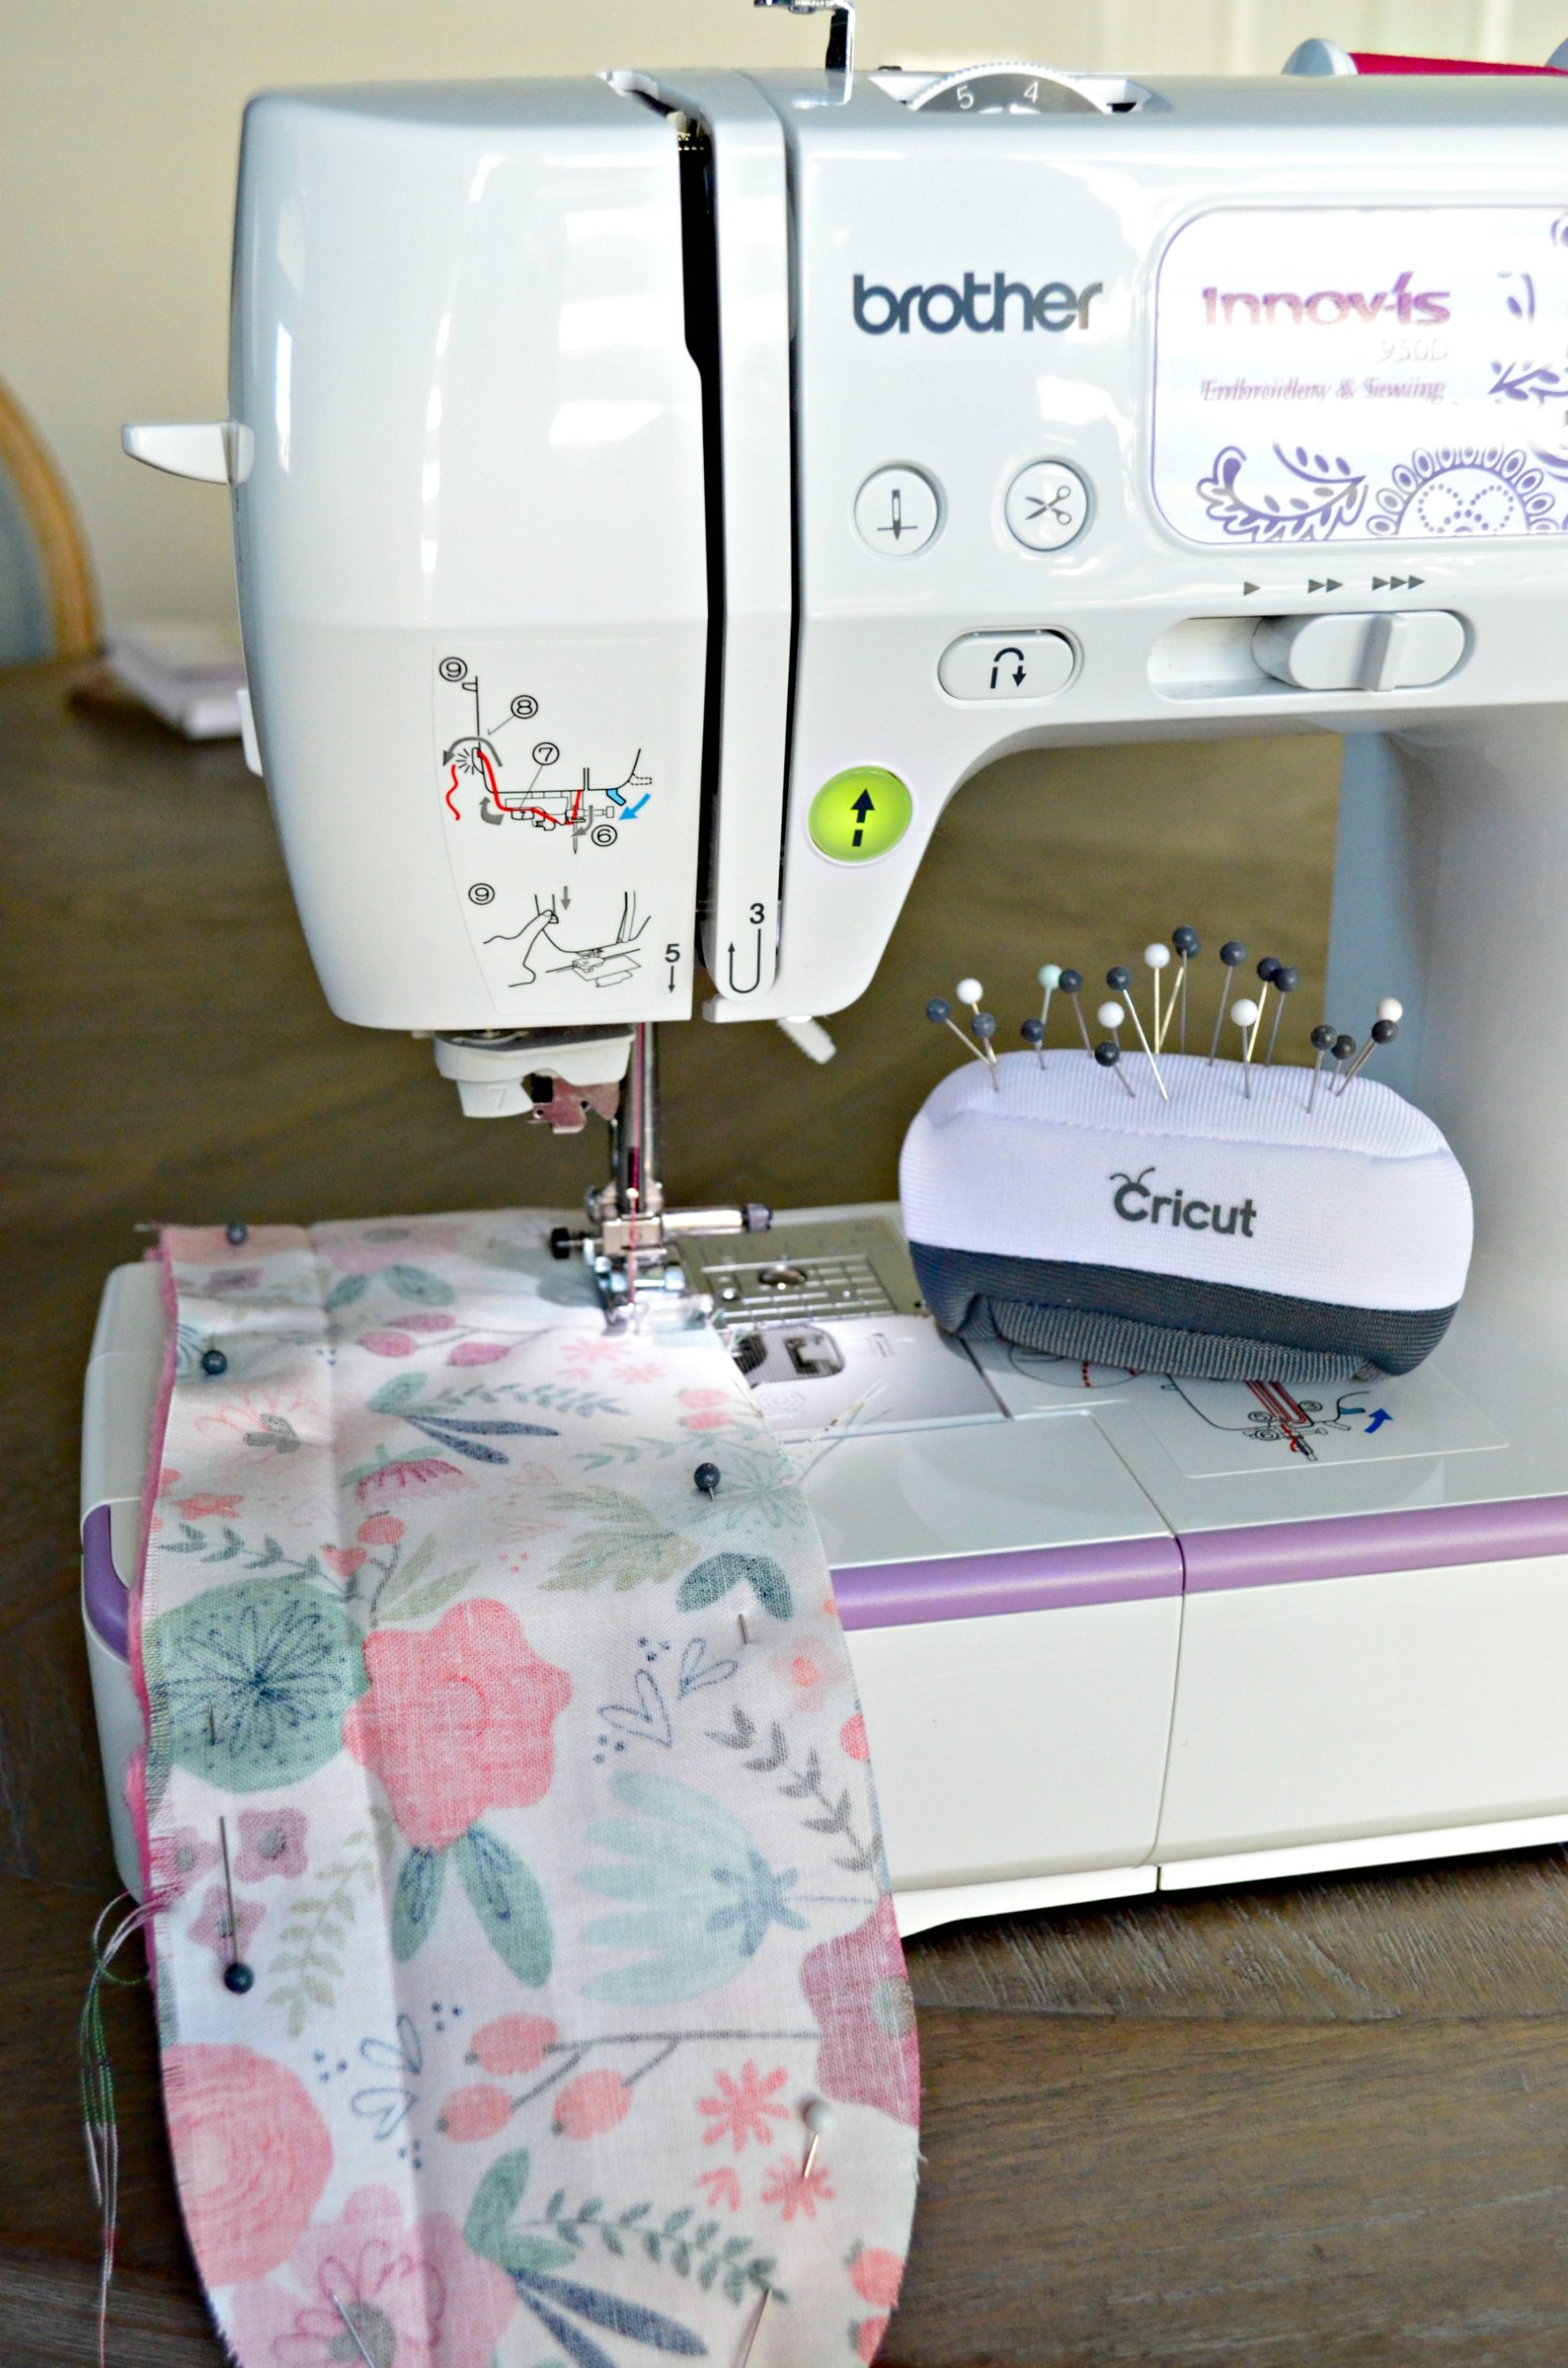 White and purple brother sewing machine sewing fabric.